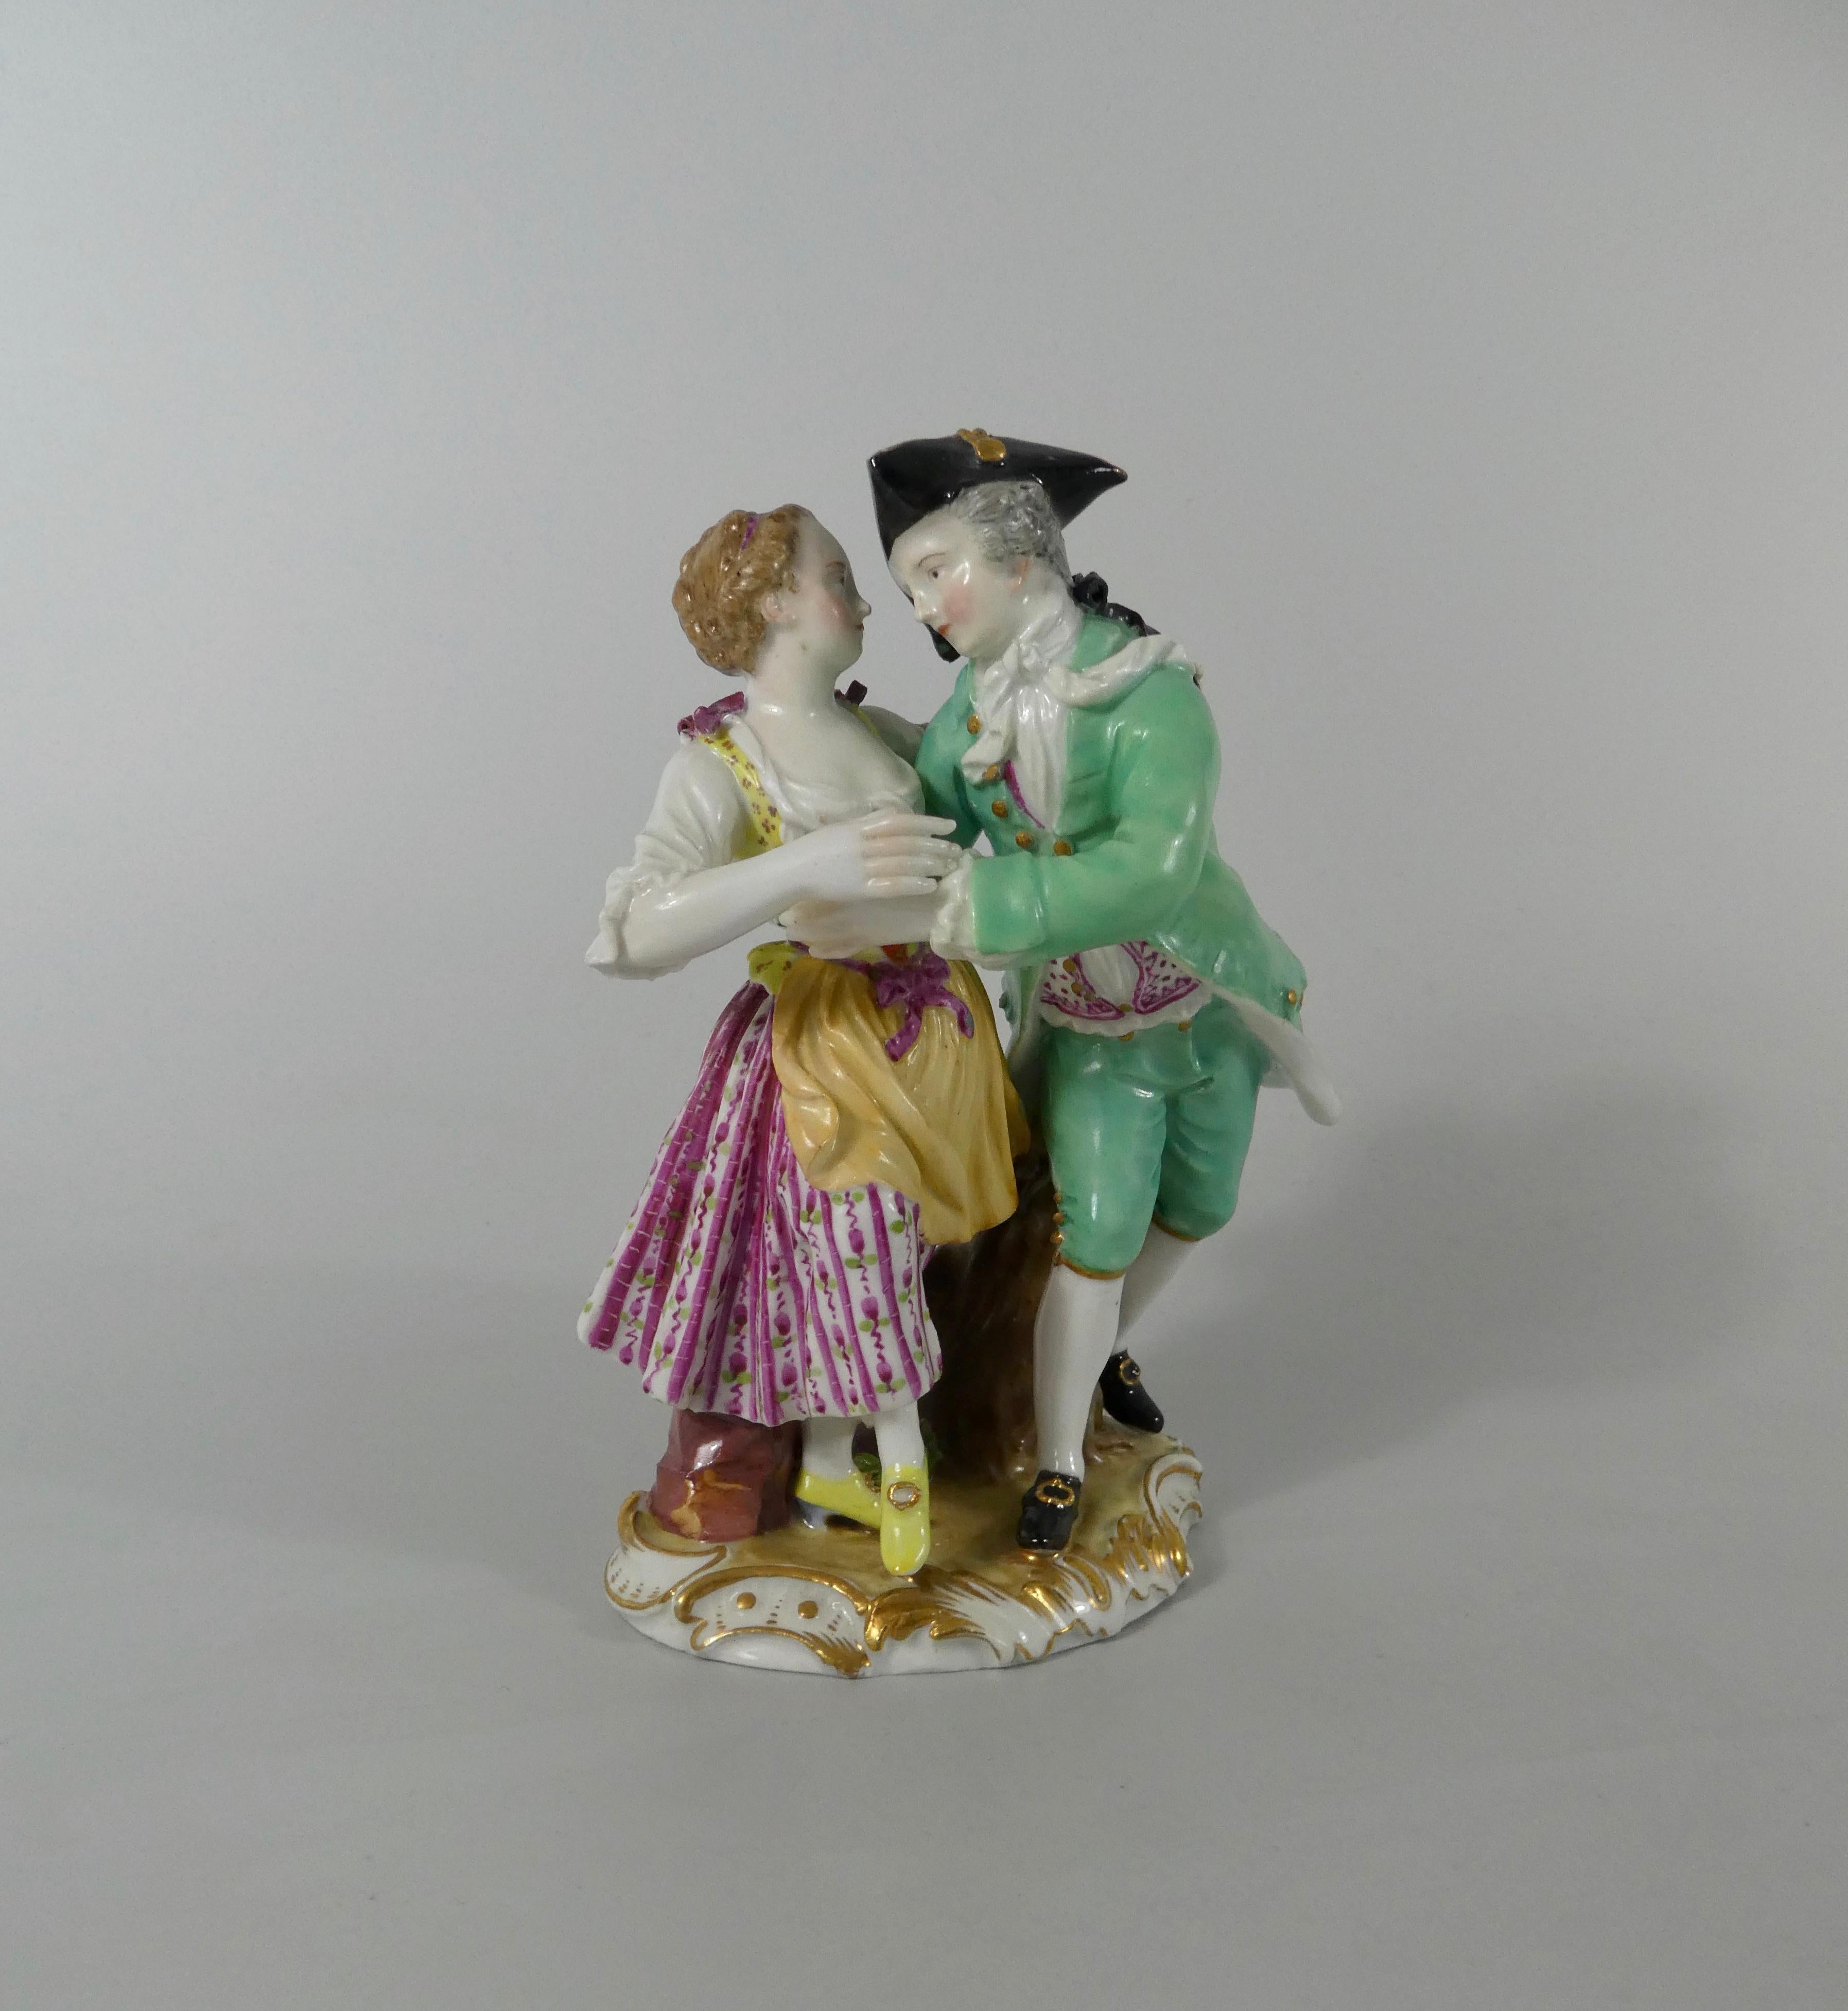 Meissen porcelain group of dancers, circa 1770. Finely modelled as an elegant 18th century couple dancing. Set upon an oval base, moulded and gilded with Rococo scroll.
Crossed swords in underglaze blue, to the base.
Measures: Height 15.5 cm, 6